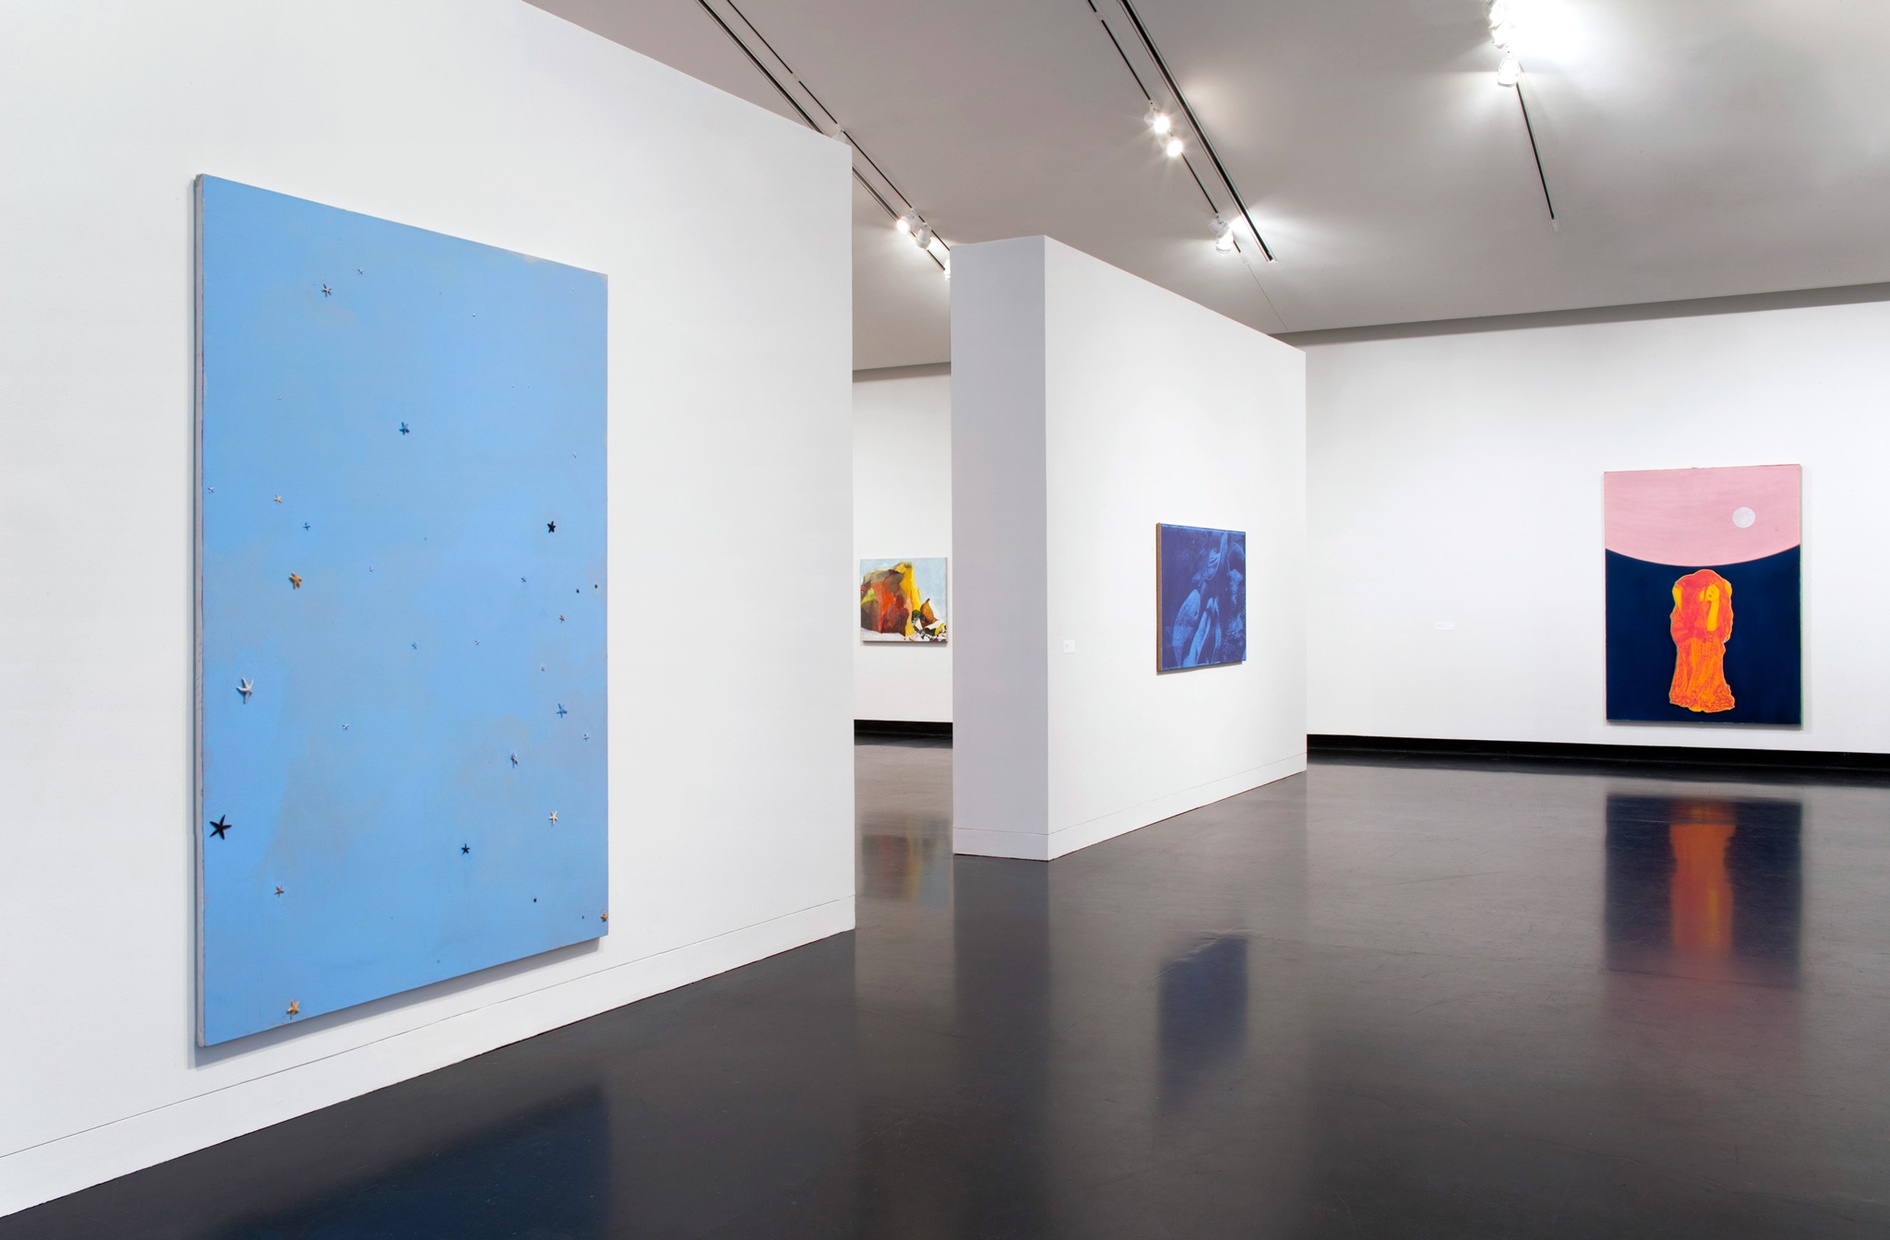 Three, large, abstract paintings on white walls. The closest painting is all blue with starfish attached to it, the painting next to it is an abstract blue painting, and the furthest painting depicts a hunched, female figure on an abstract background.